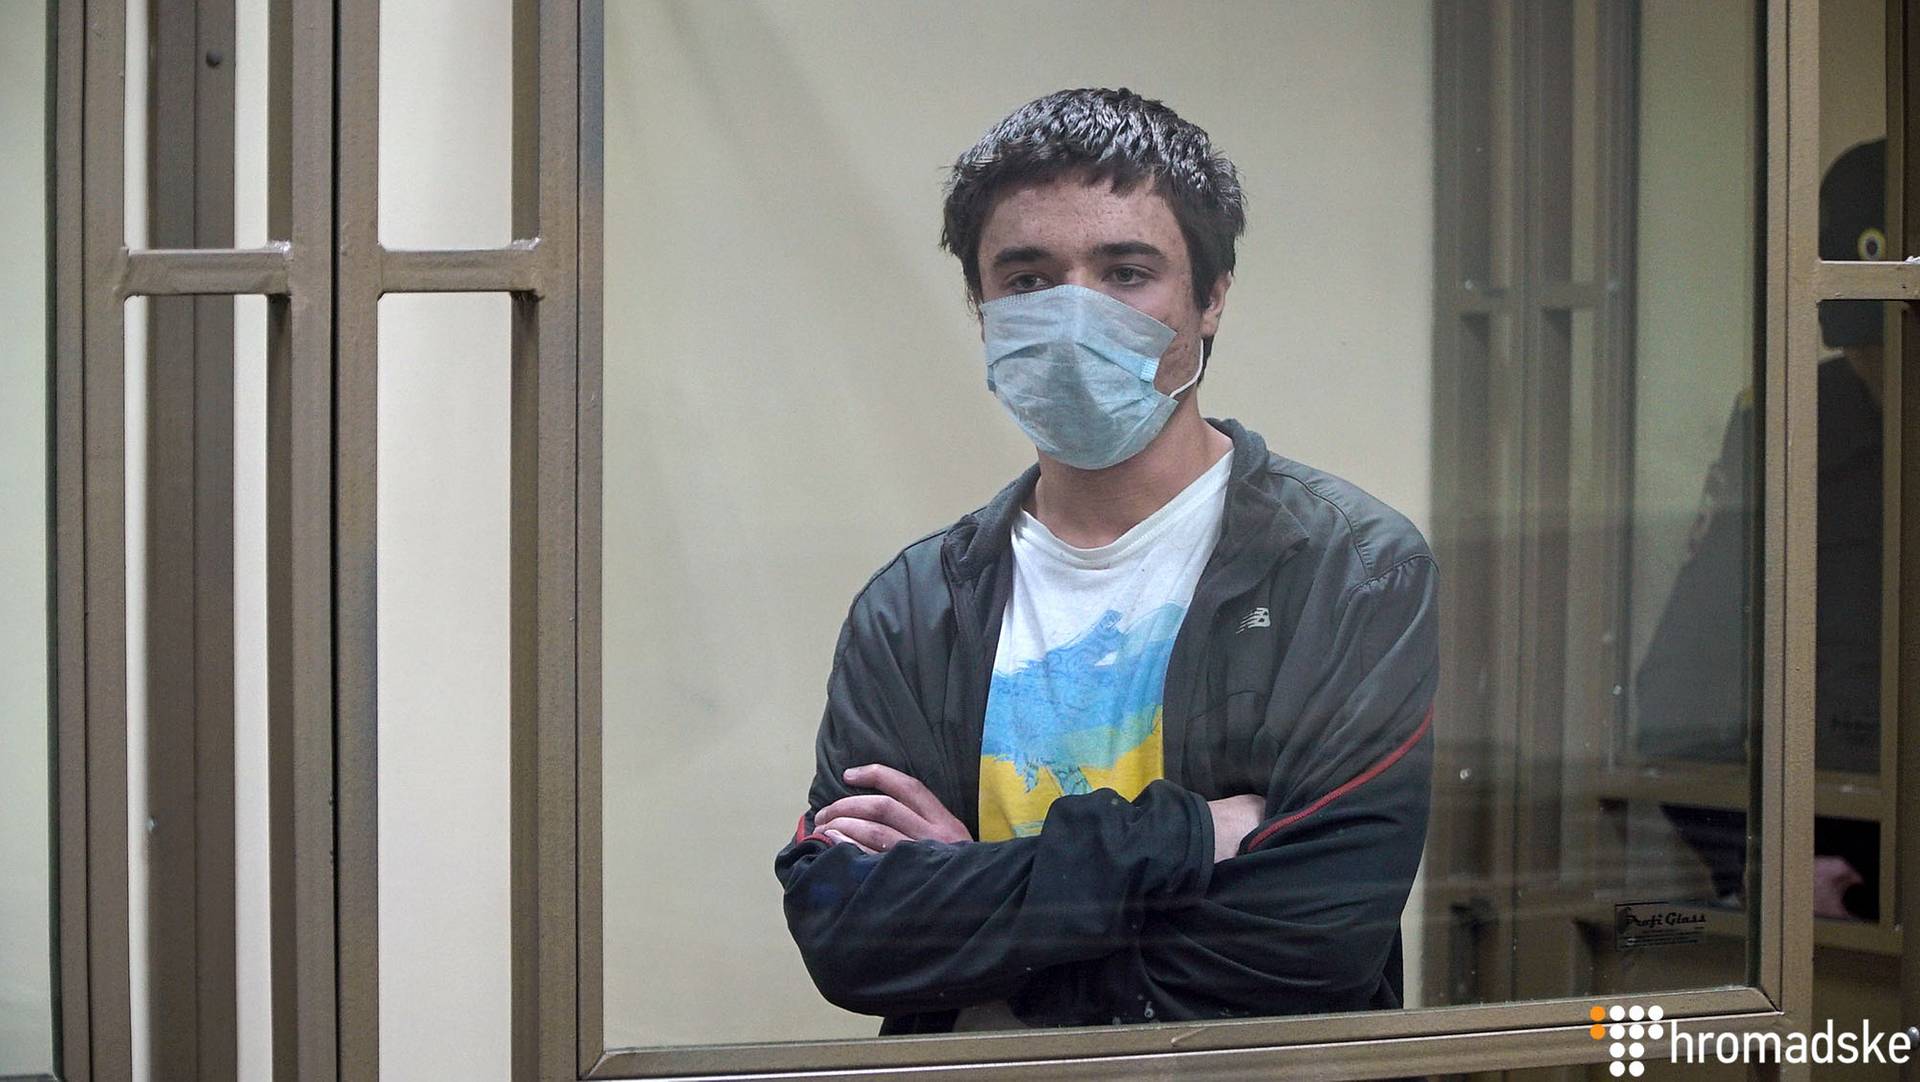 Russia sentences gravely ill Ukrainian political prisoner it abducted to 6 years, he launches hunger strike